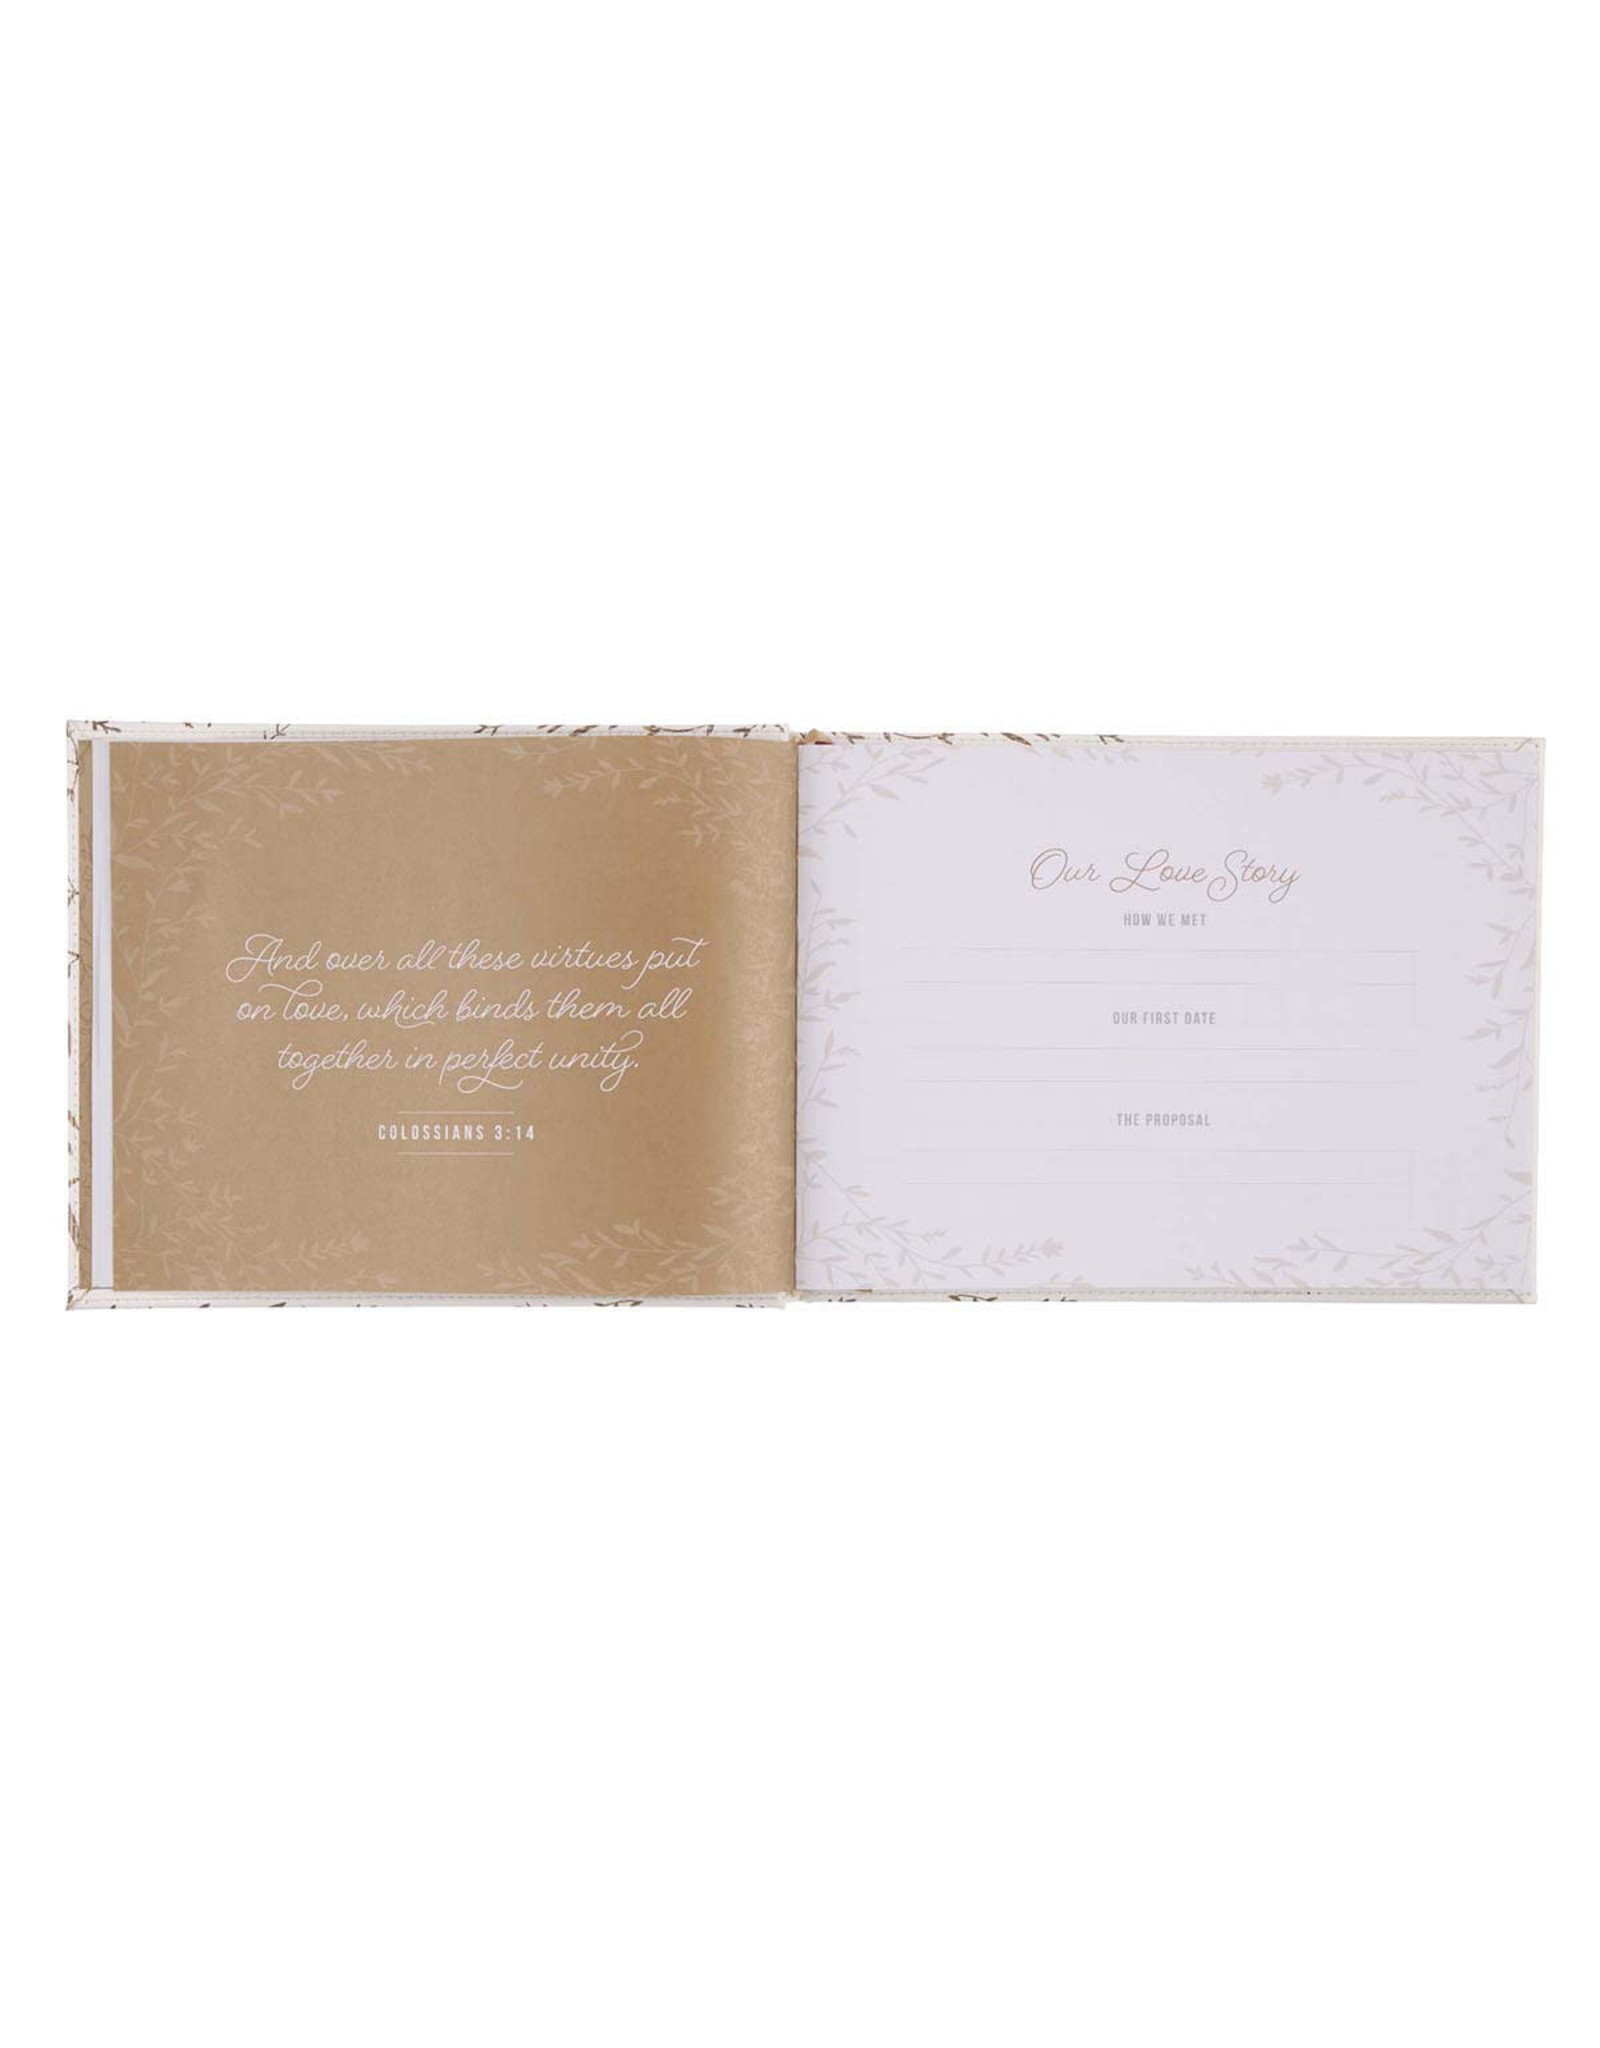 Guest Book - Wedding - Always & Forever, Medium White & Gold Faux Leather